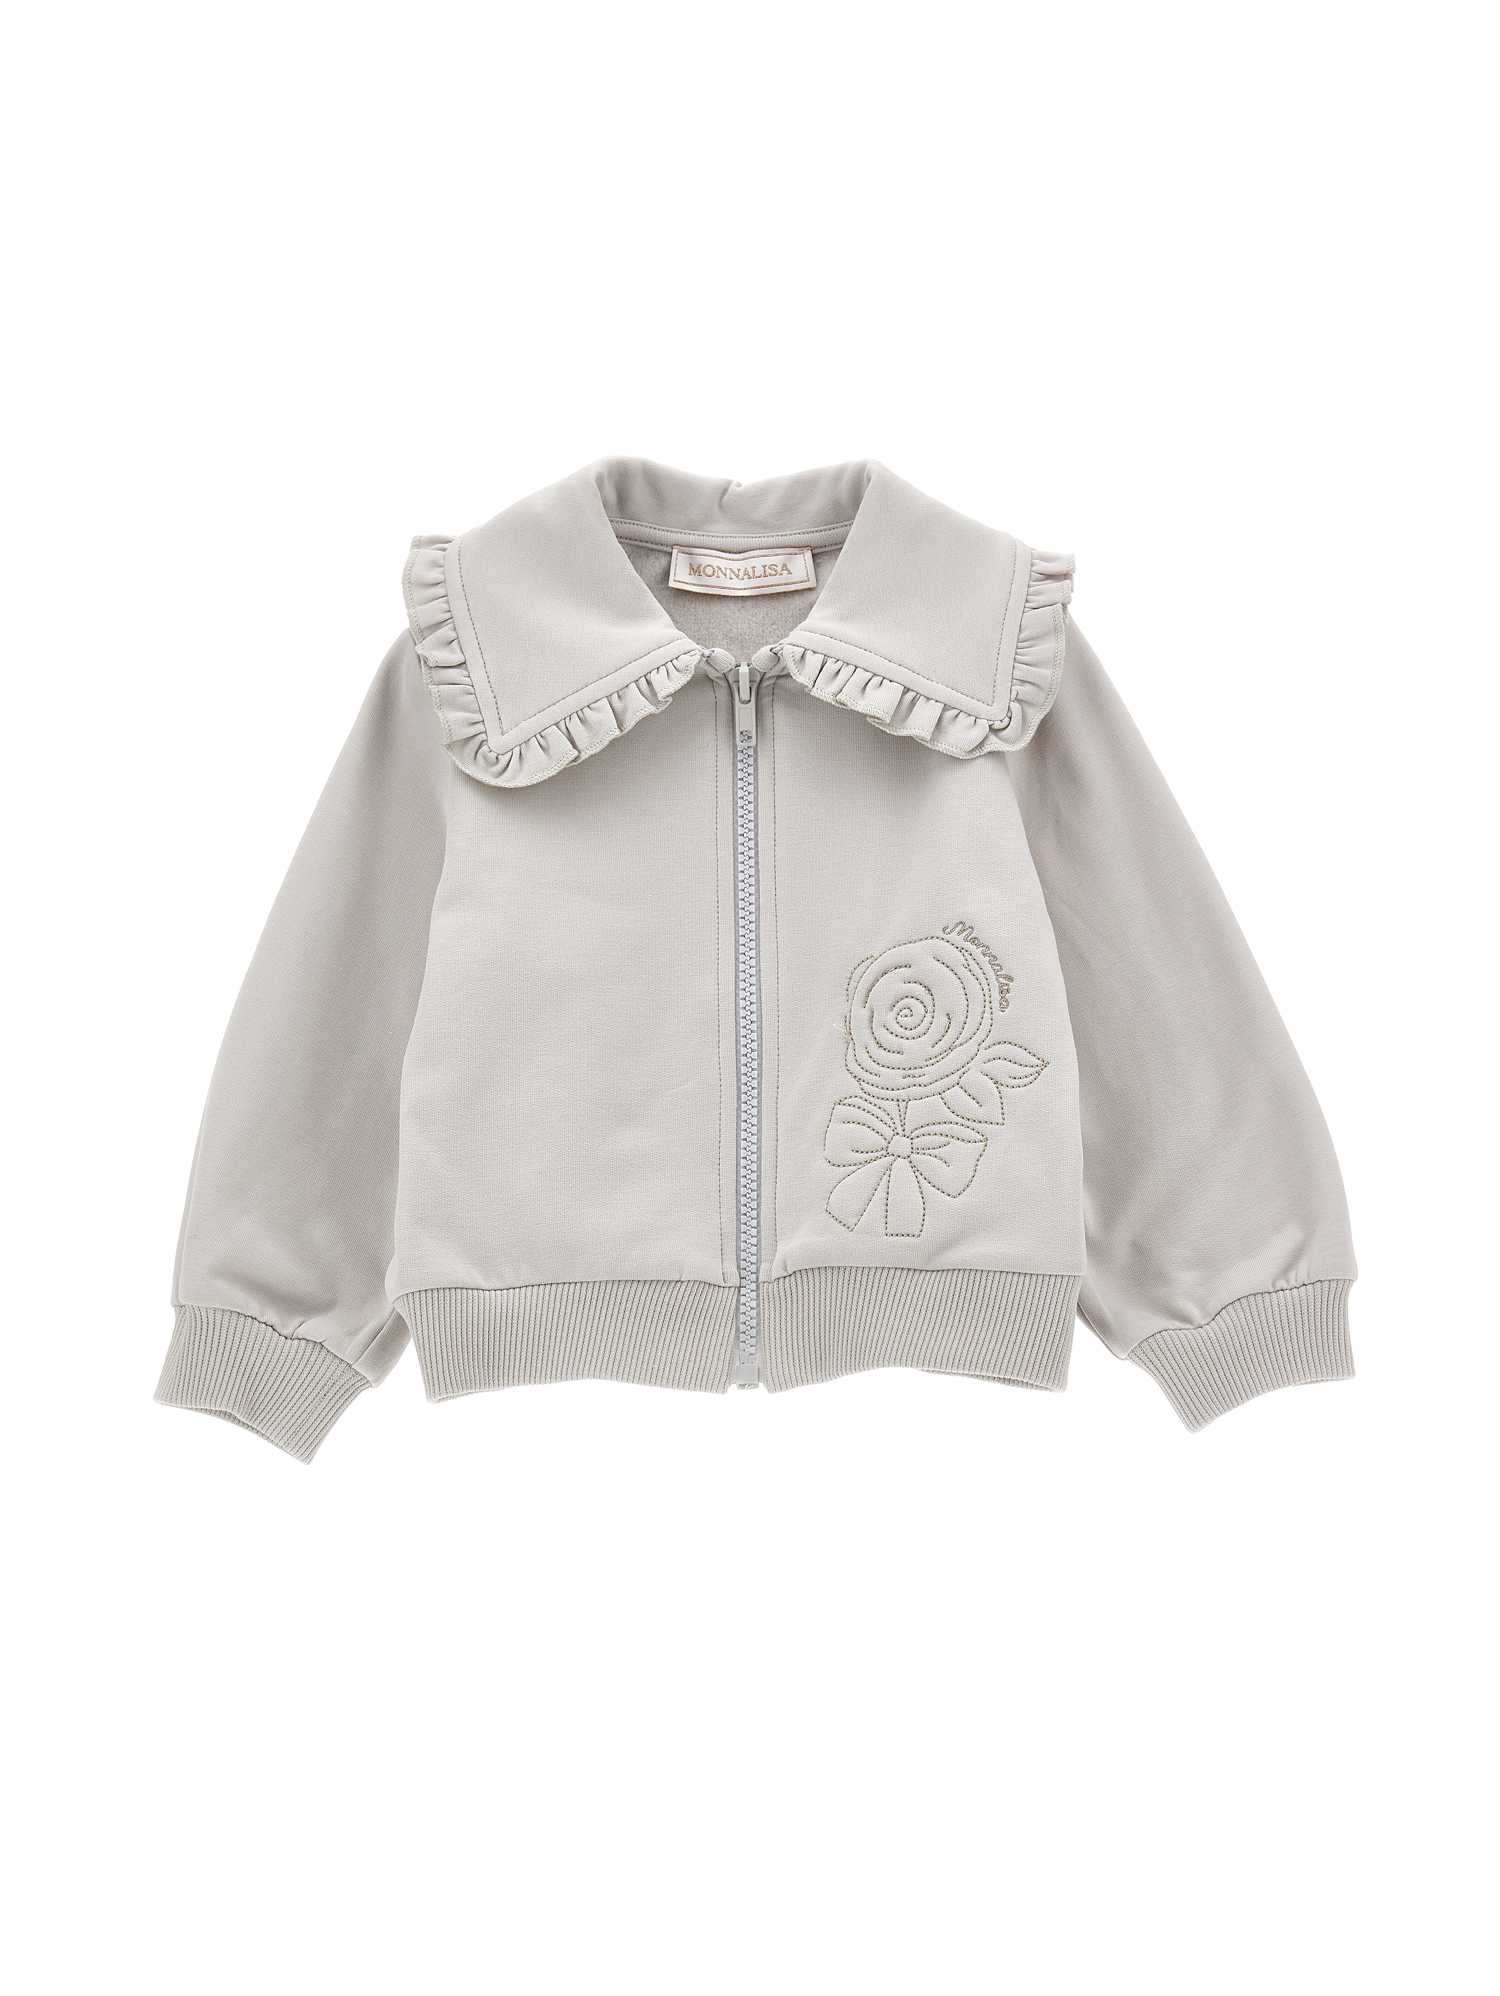 Monnalisa Kids'   Sweatshirt With Collar And Embroidery In Pearl Grey